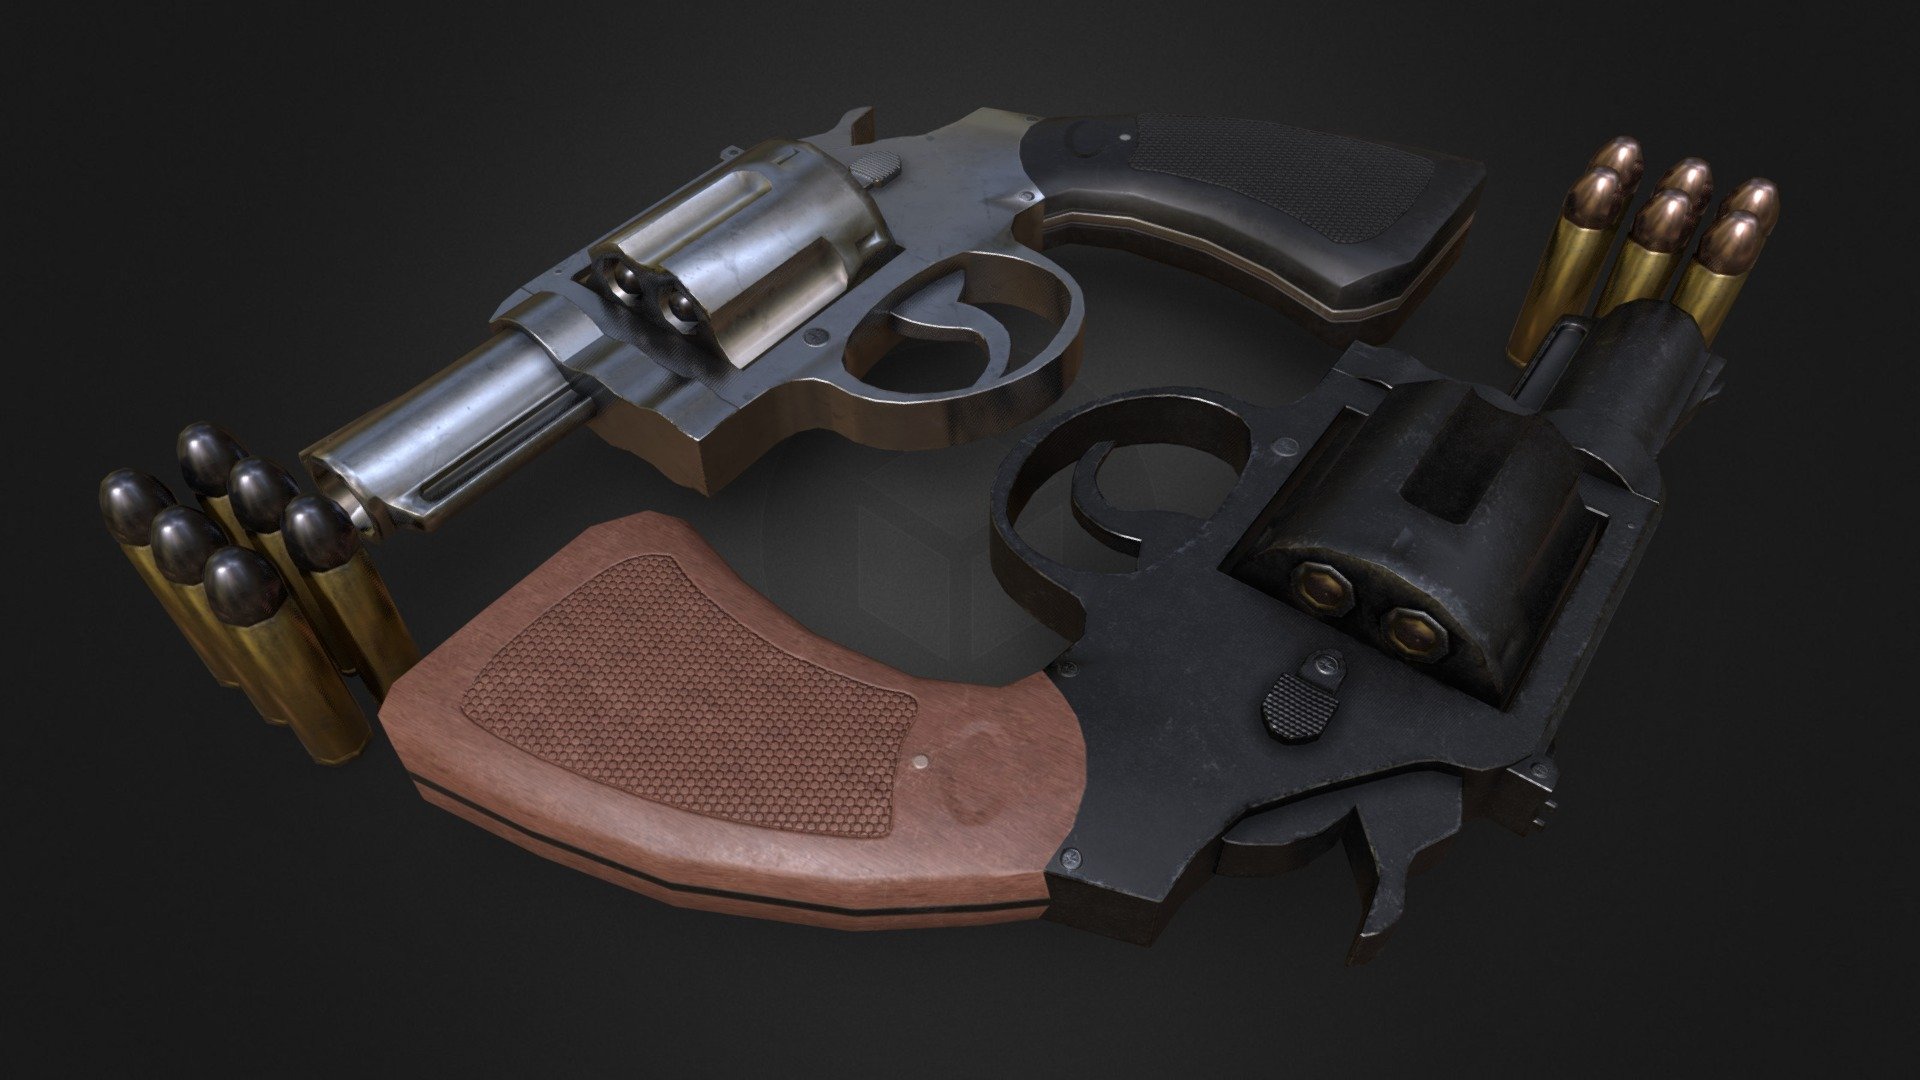 Total Polycounts for the model (Only Gun and one Bullet)
Vertices: 2285
Triangles: 4439

A snubnose revolver is a compact handgun with a shorter barrel length than traditional revolvers, typically ranging from 1.5 to 3 inches. Due to its smaller size, it is popular for concealed carry and self-defense purposes. Snubnose revolvers are also known for their reliability and ease of use, making them a popular choice for beginners. They come in various calibers, including .38 Special and .357 Magnum, and often have a five-round capacity. Despite their small size, snubnose revolvers can pack a powerful punch and have been used by law enforcement and civilians alike for many years 3d model